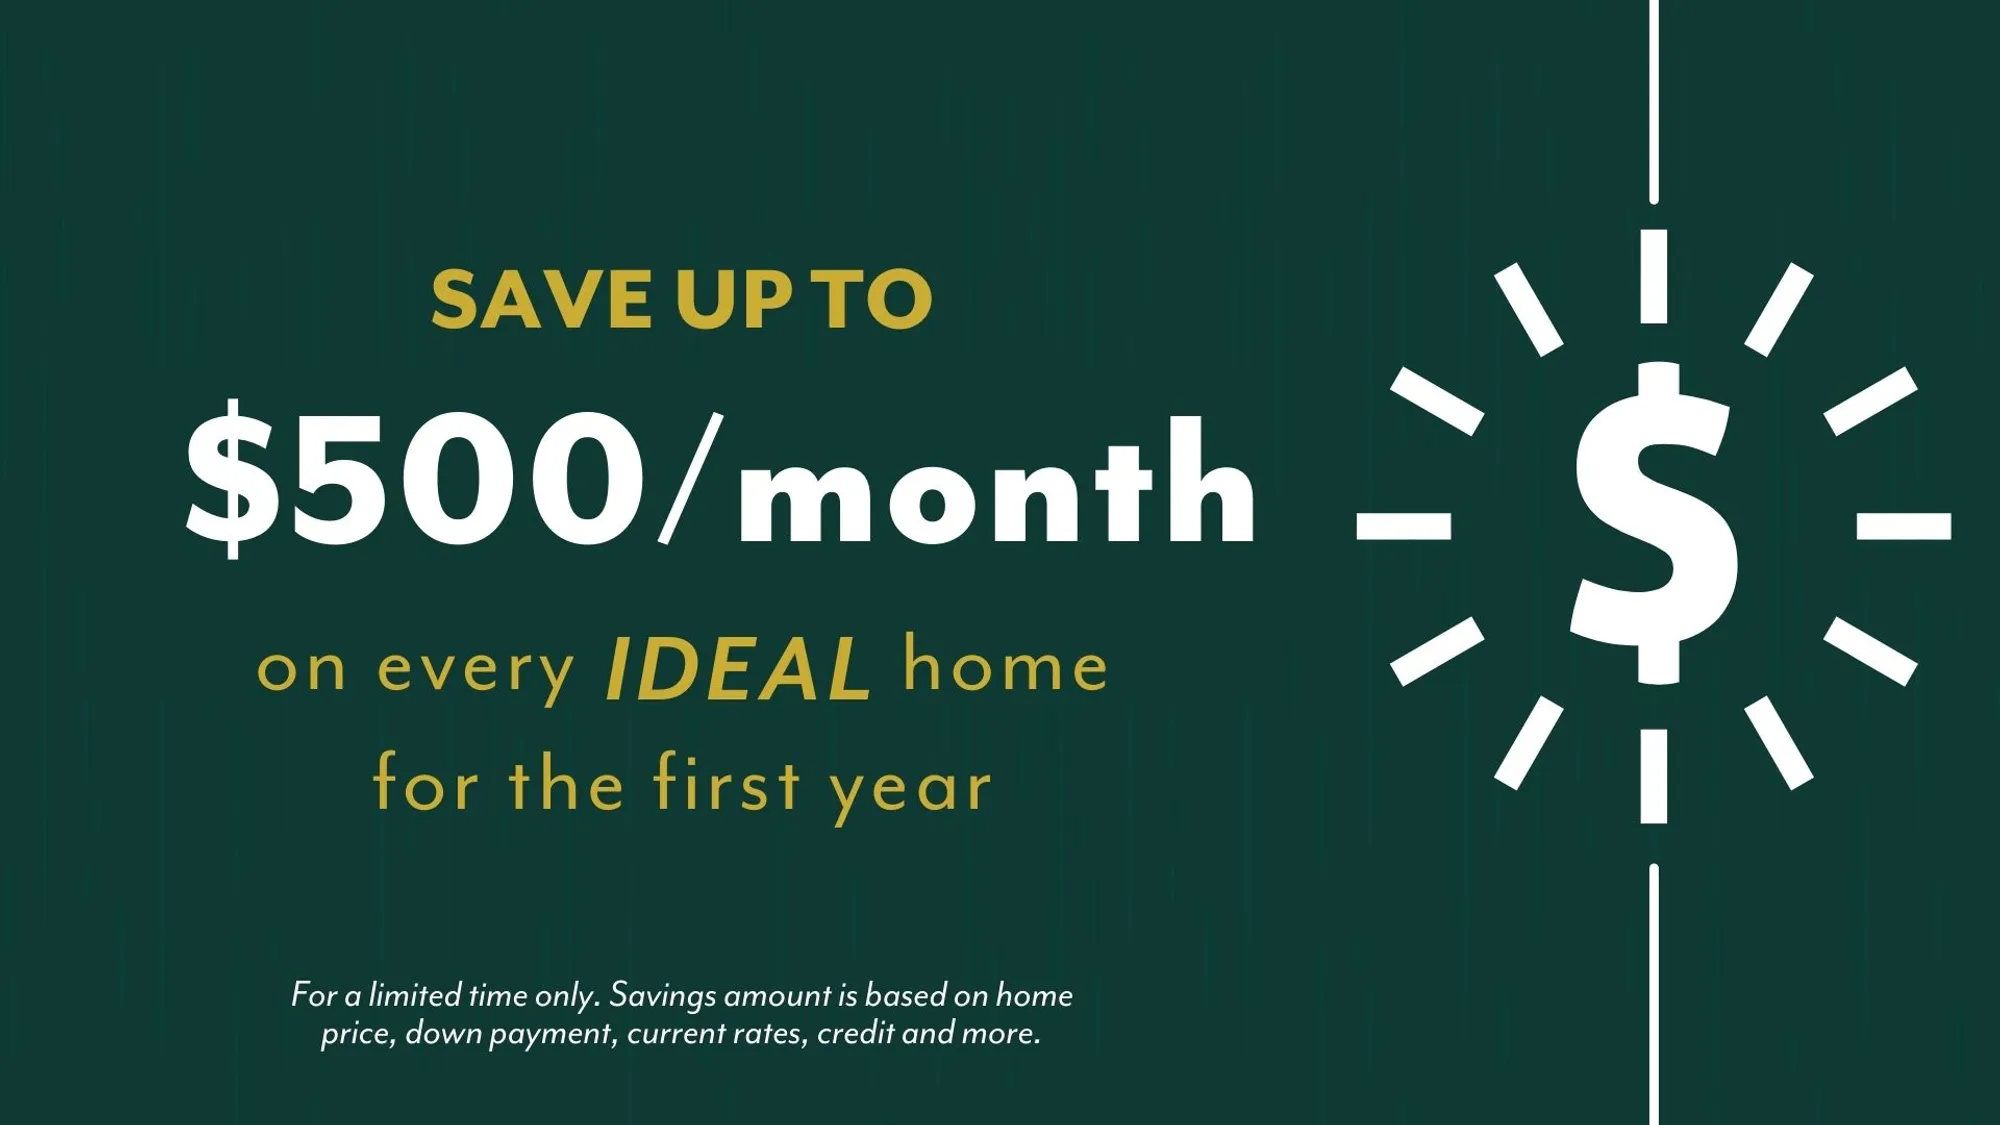 save up to $500/month on every ideal home for the first year